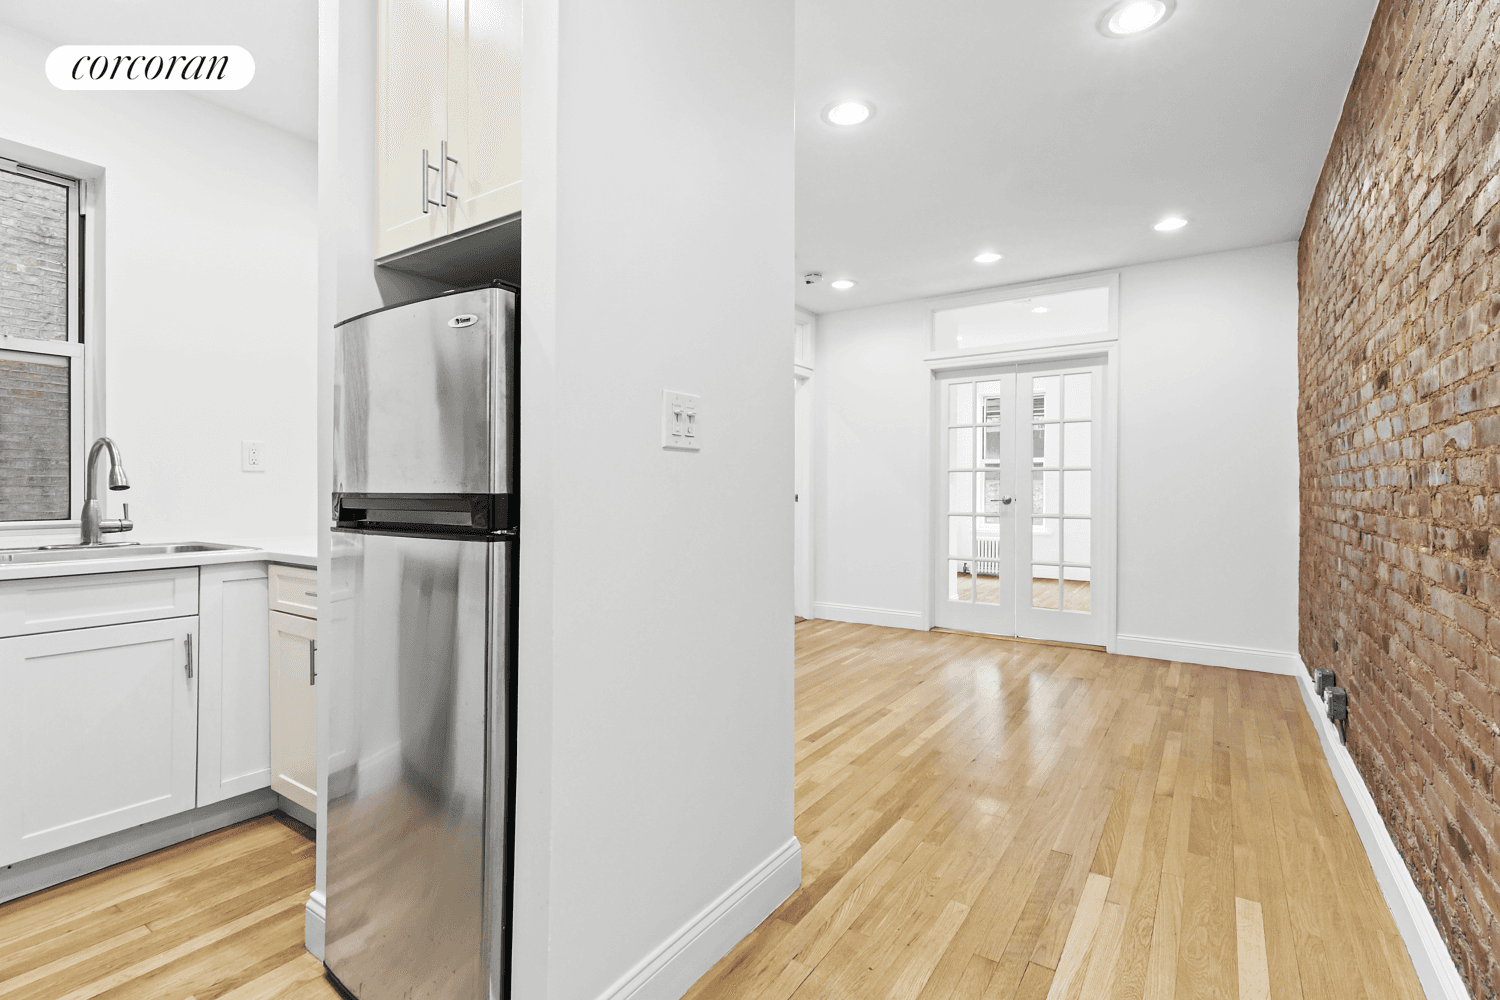 Introducing 3161 Broadway, Unit 3A a vibrant, pre war gem in the heart of Morningside Heights.